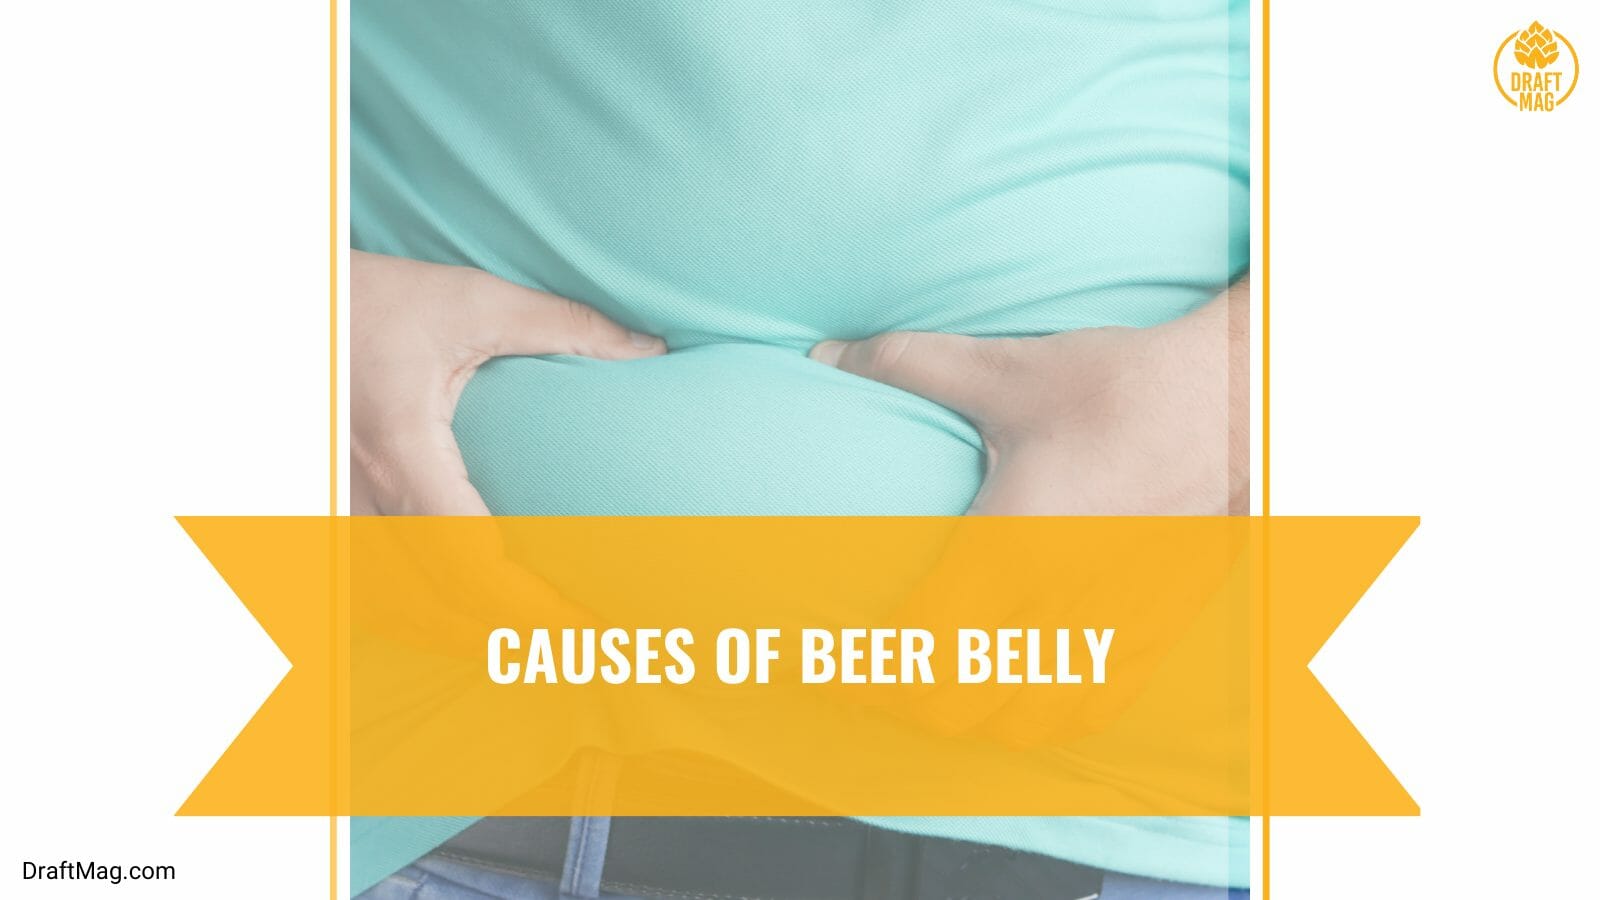 Causes of beer belly